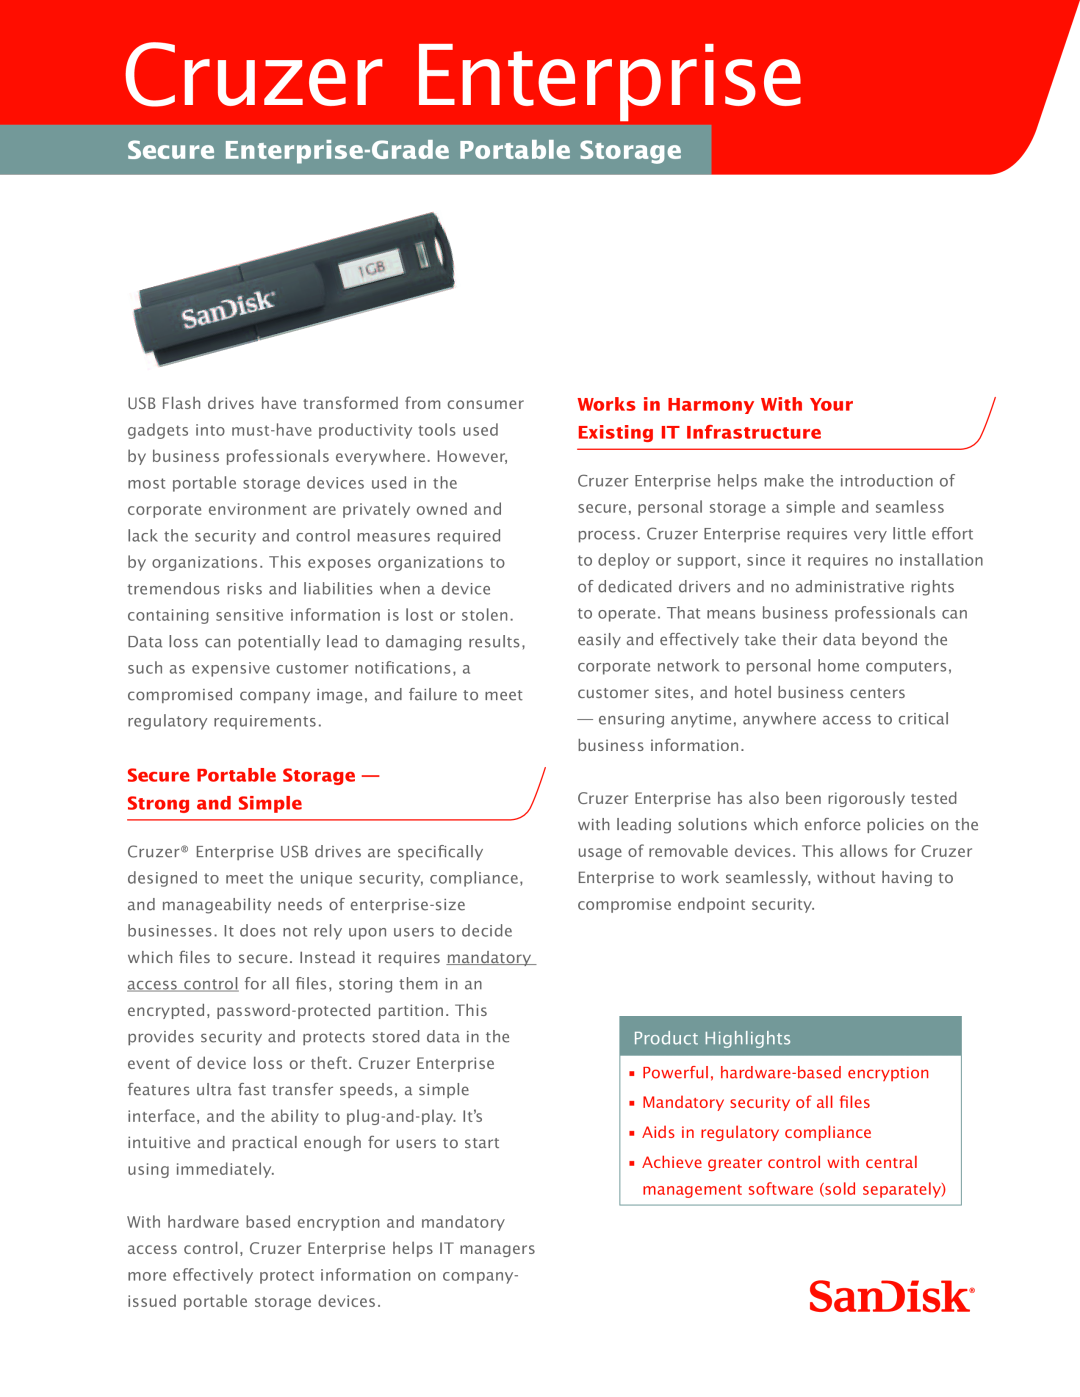 SanDisk 80-11-01450 manual Works in Harmony With Your Existing IT Infrastructure, Cruzer Enterprise, Product Highlights 